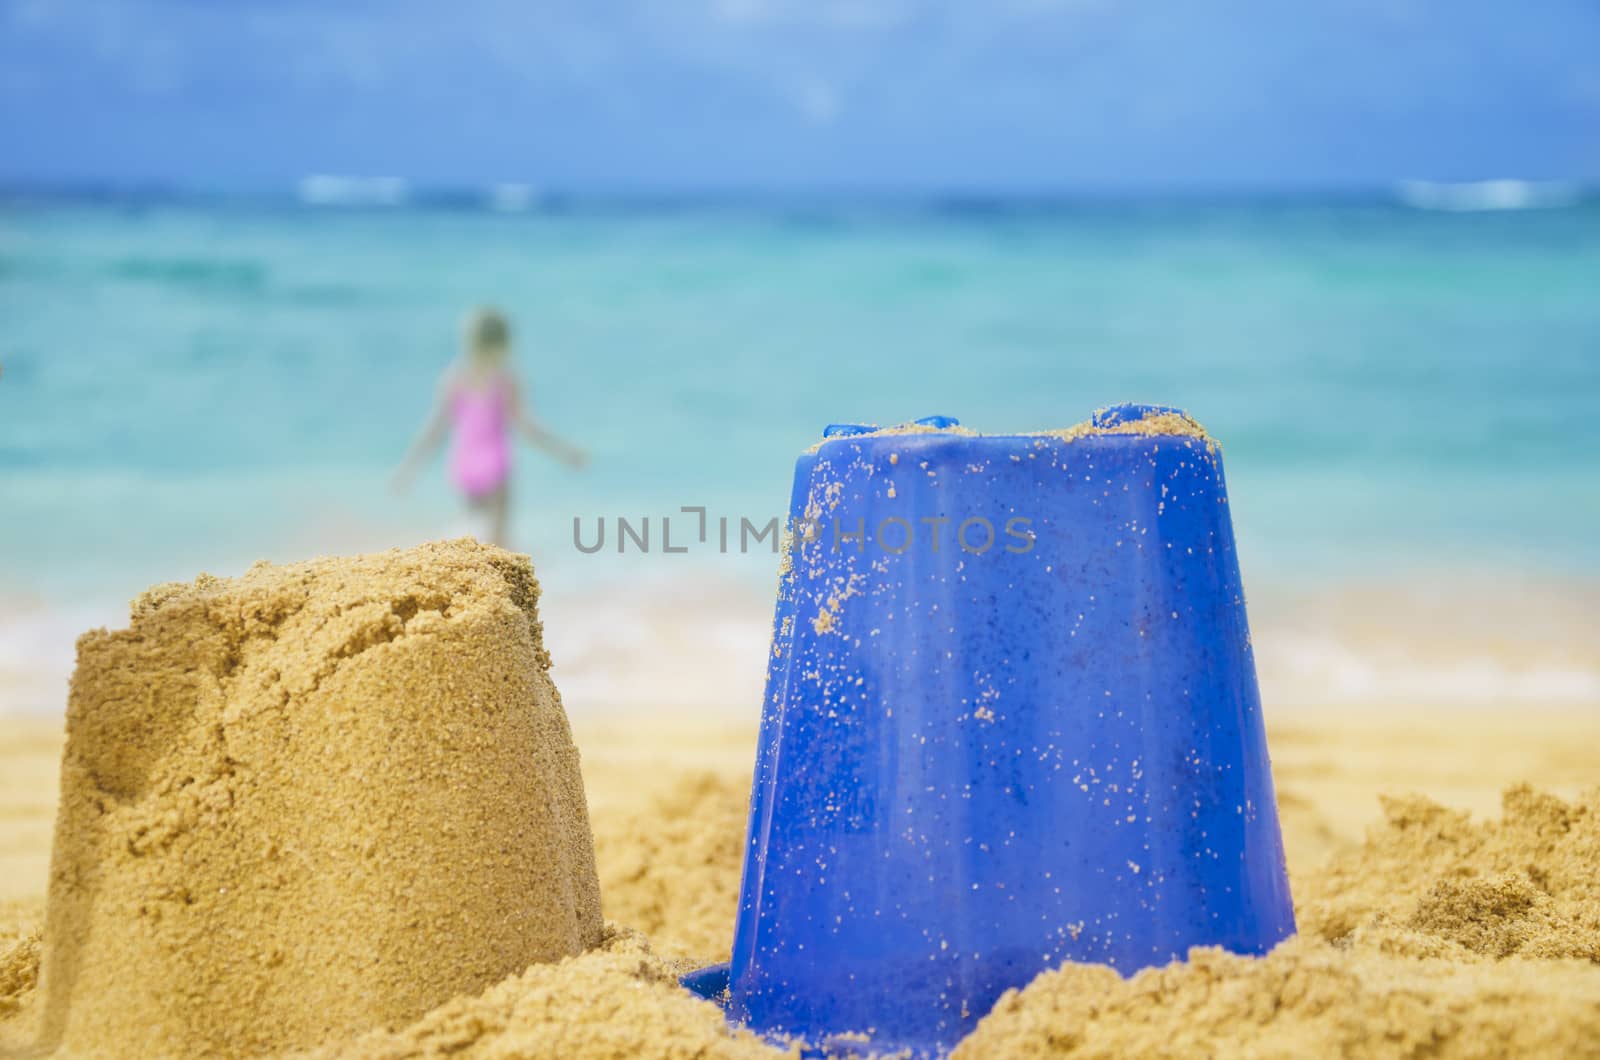 Sculpture and toy on sandy beach with girl by the ocean on background